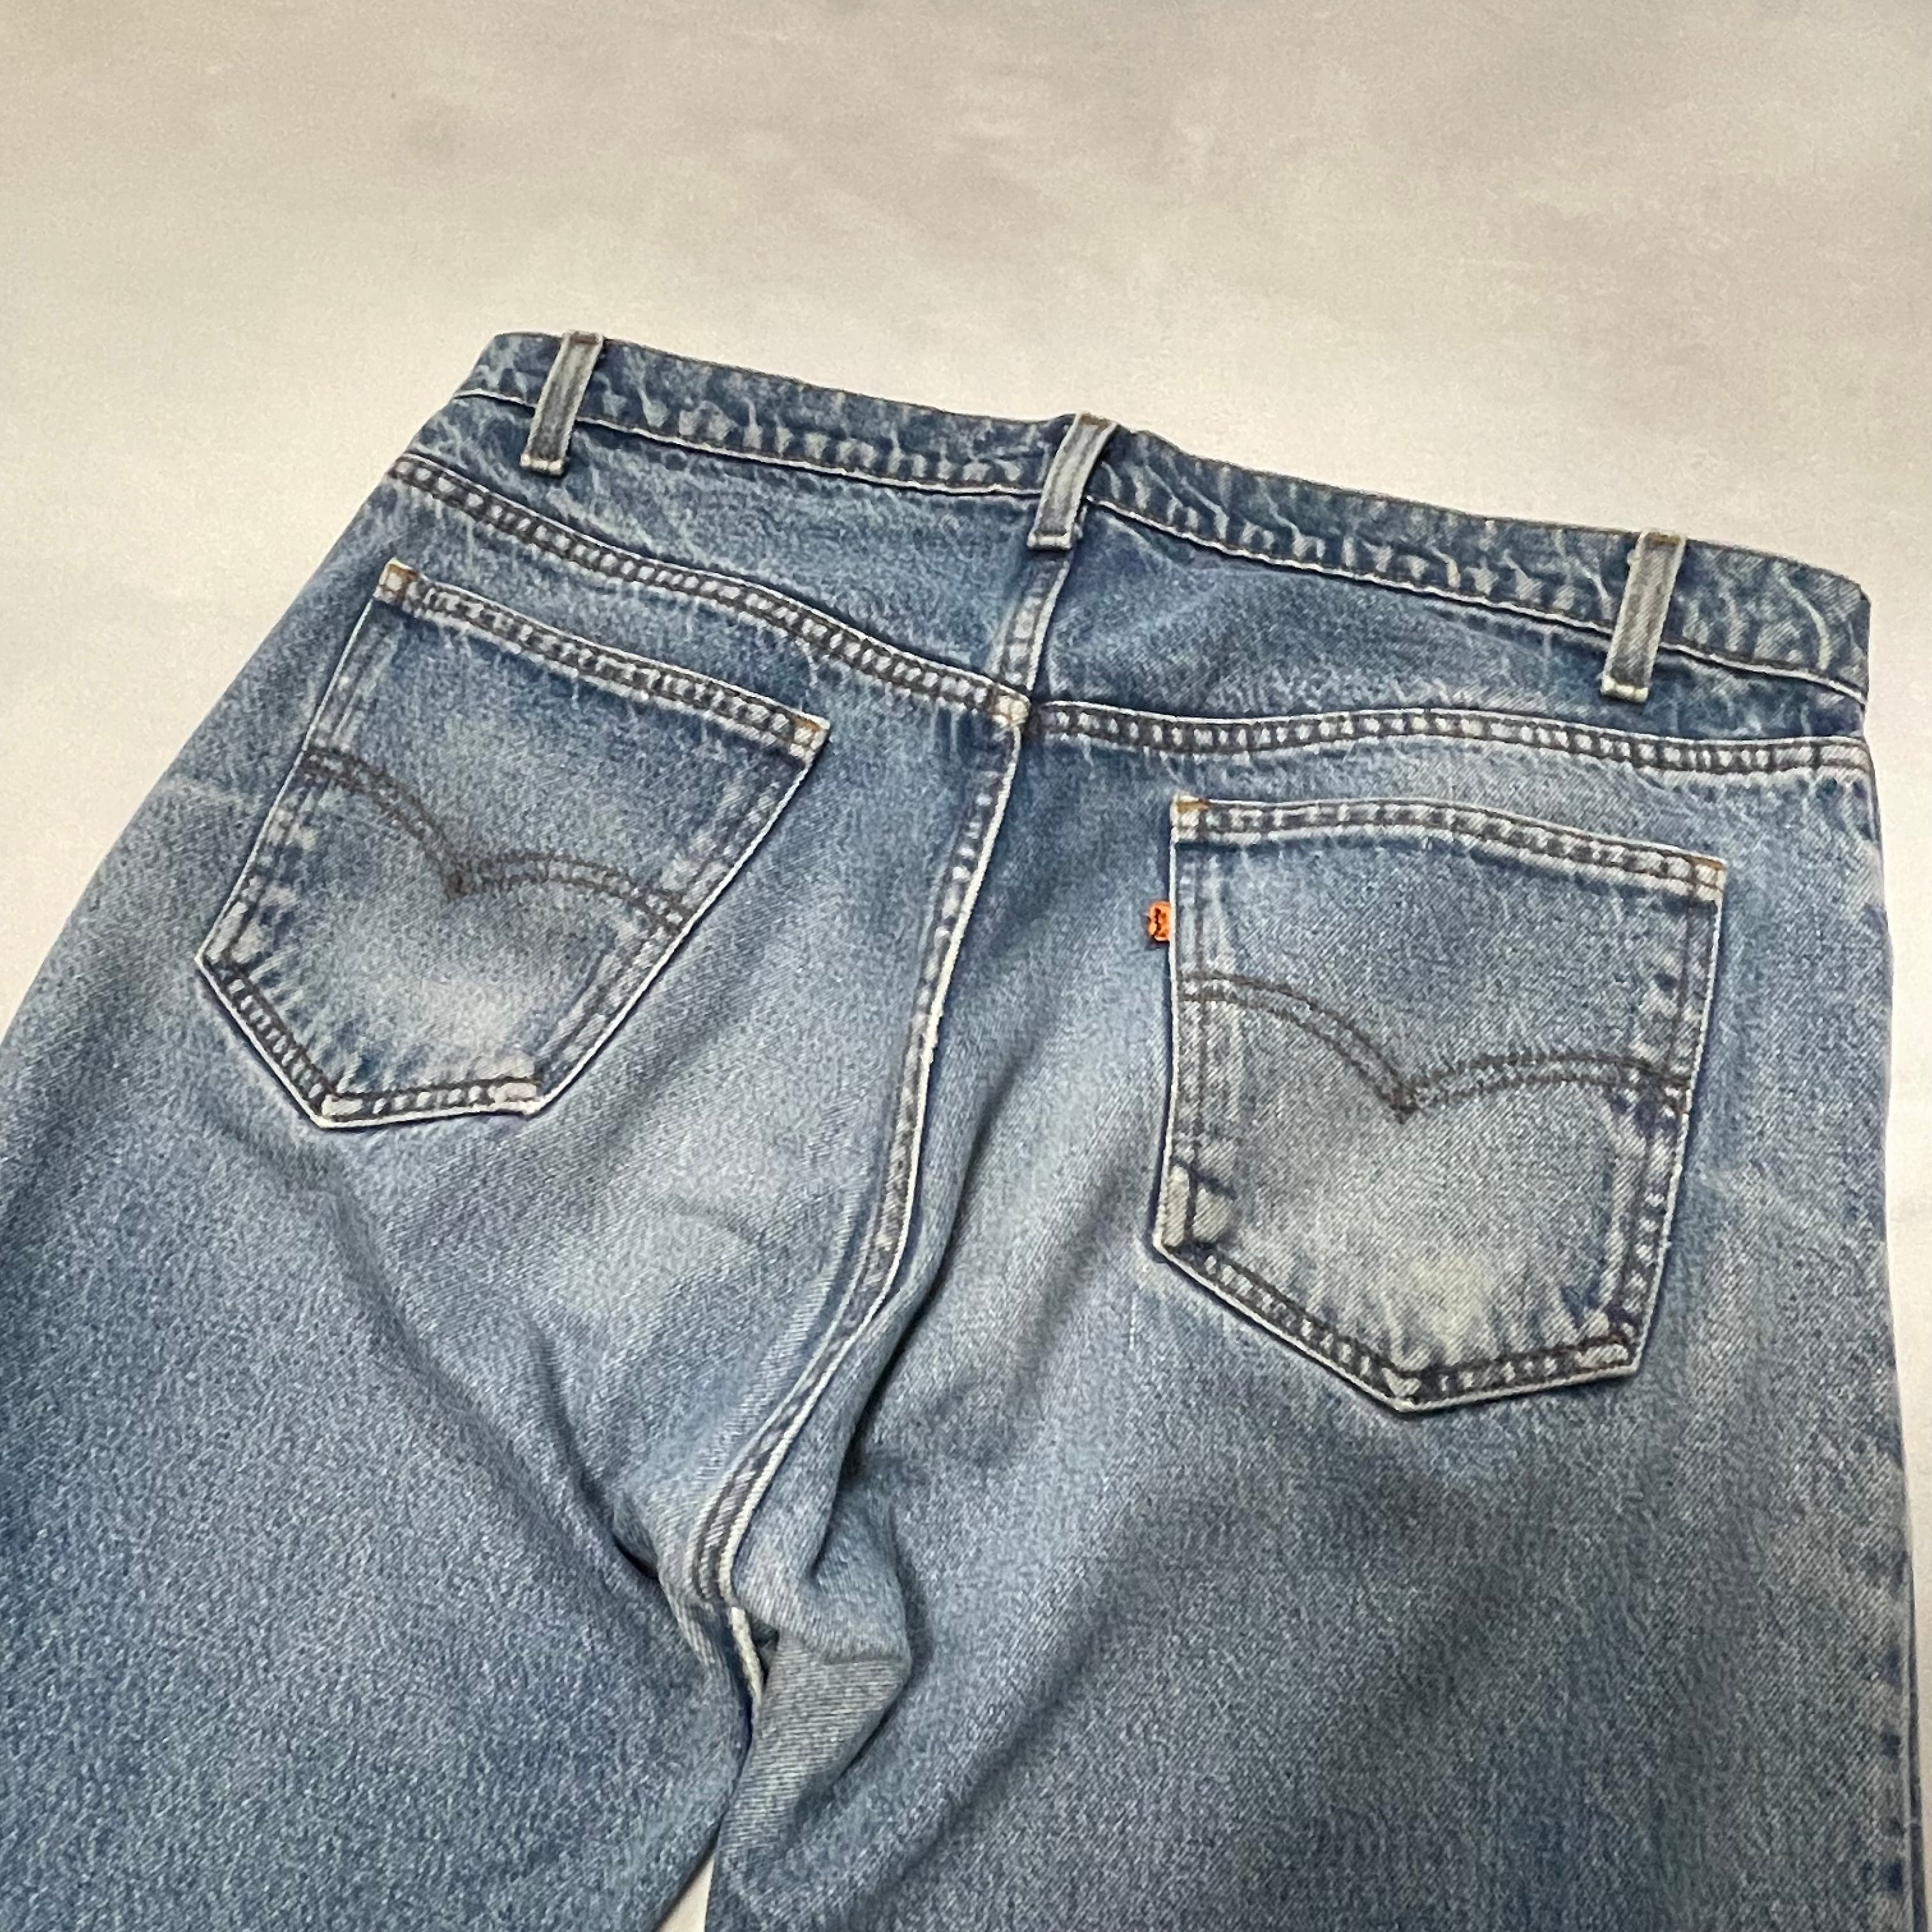 LEVI'S 505 W38 L34 オレンジタブ / Made in USAMate - iau.edu.lc